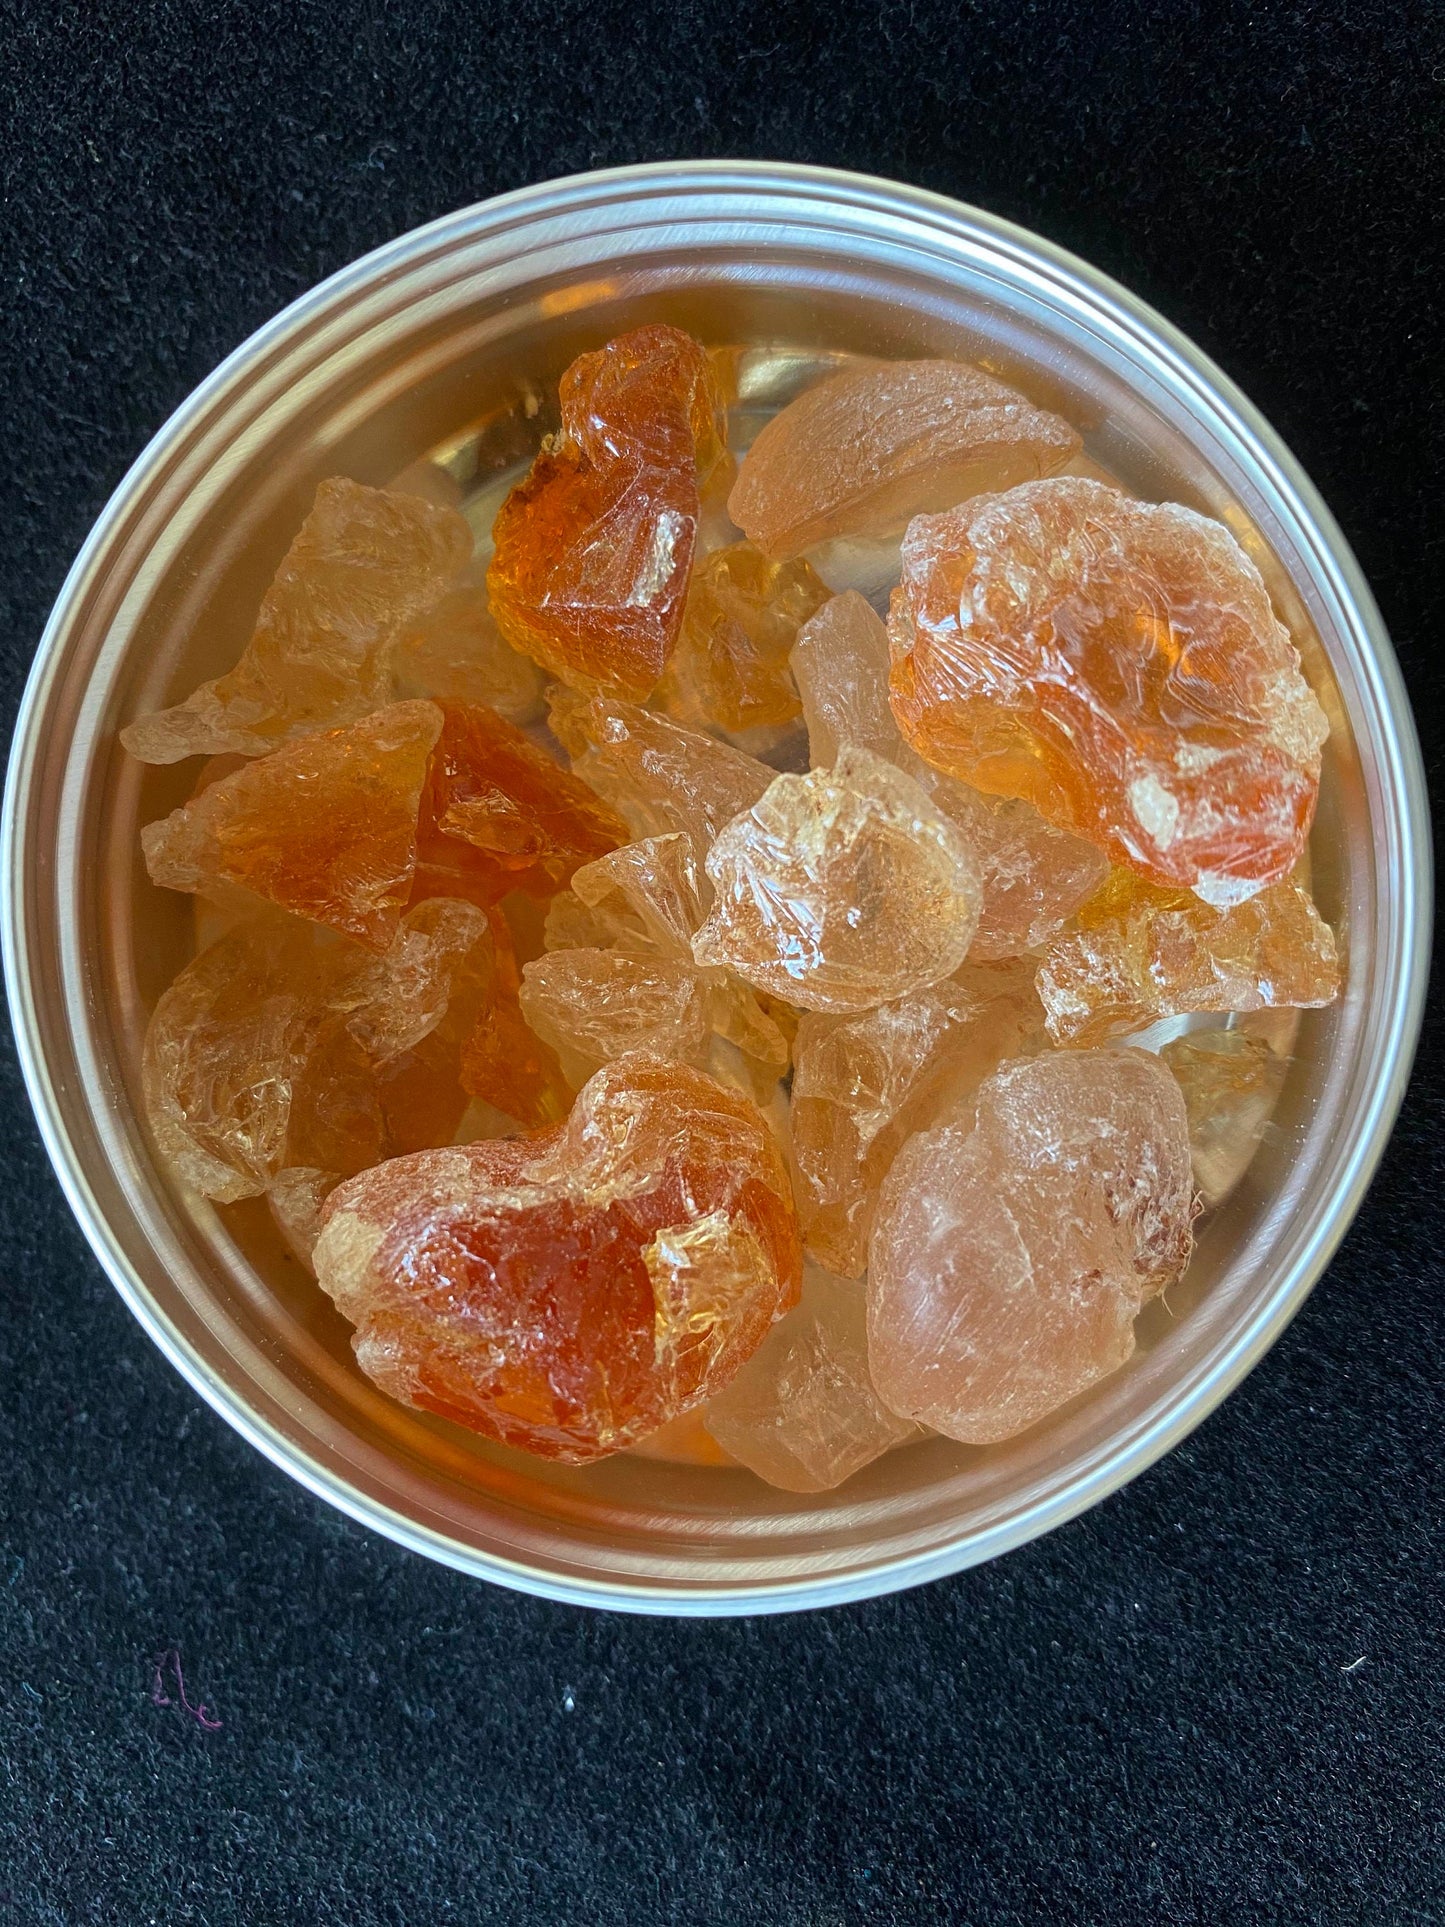 Gum Arabic Resin  | 1 ounce | Natural Tree Resin | Africa|